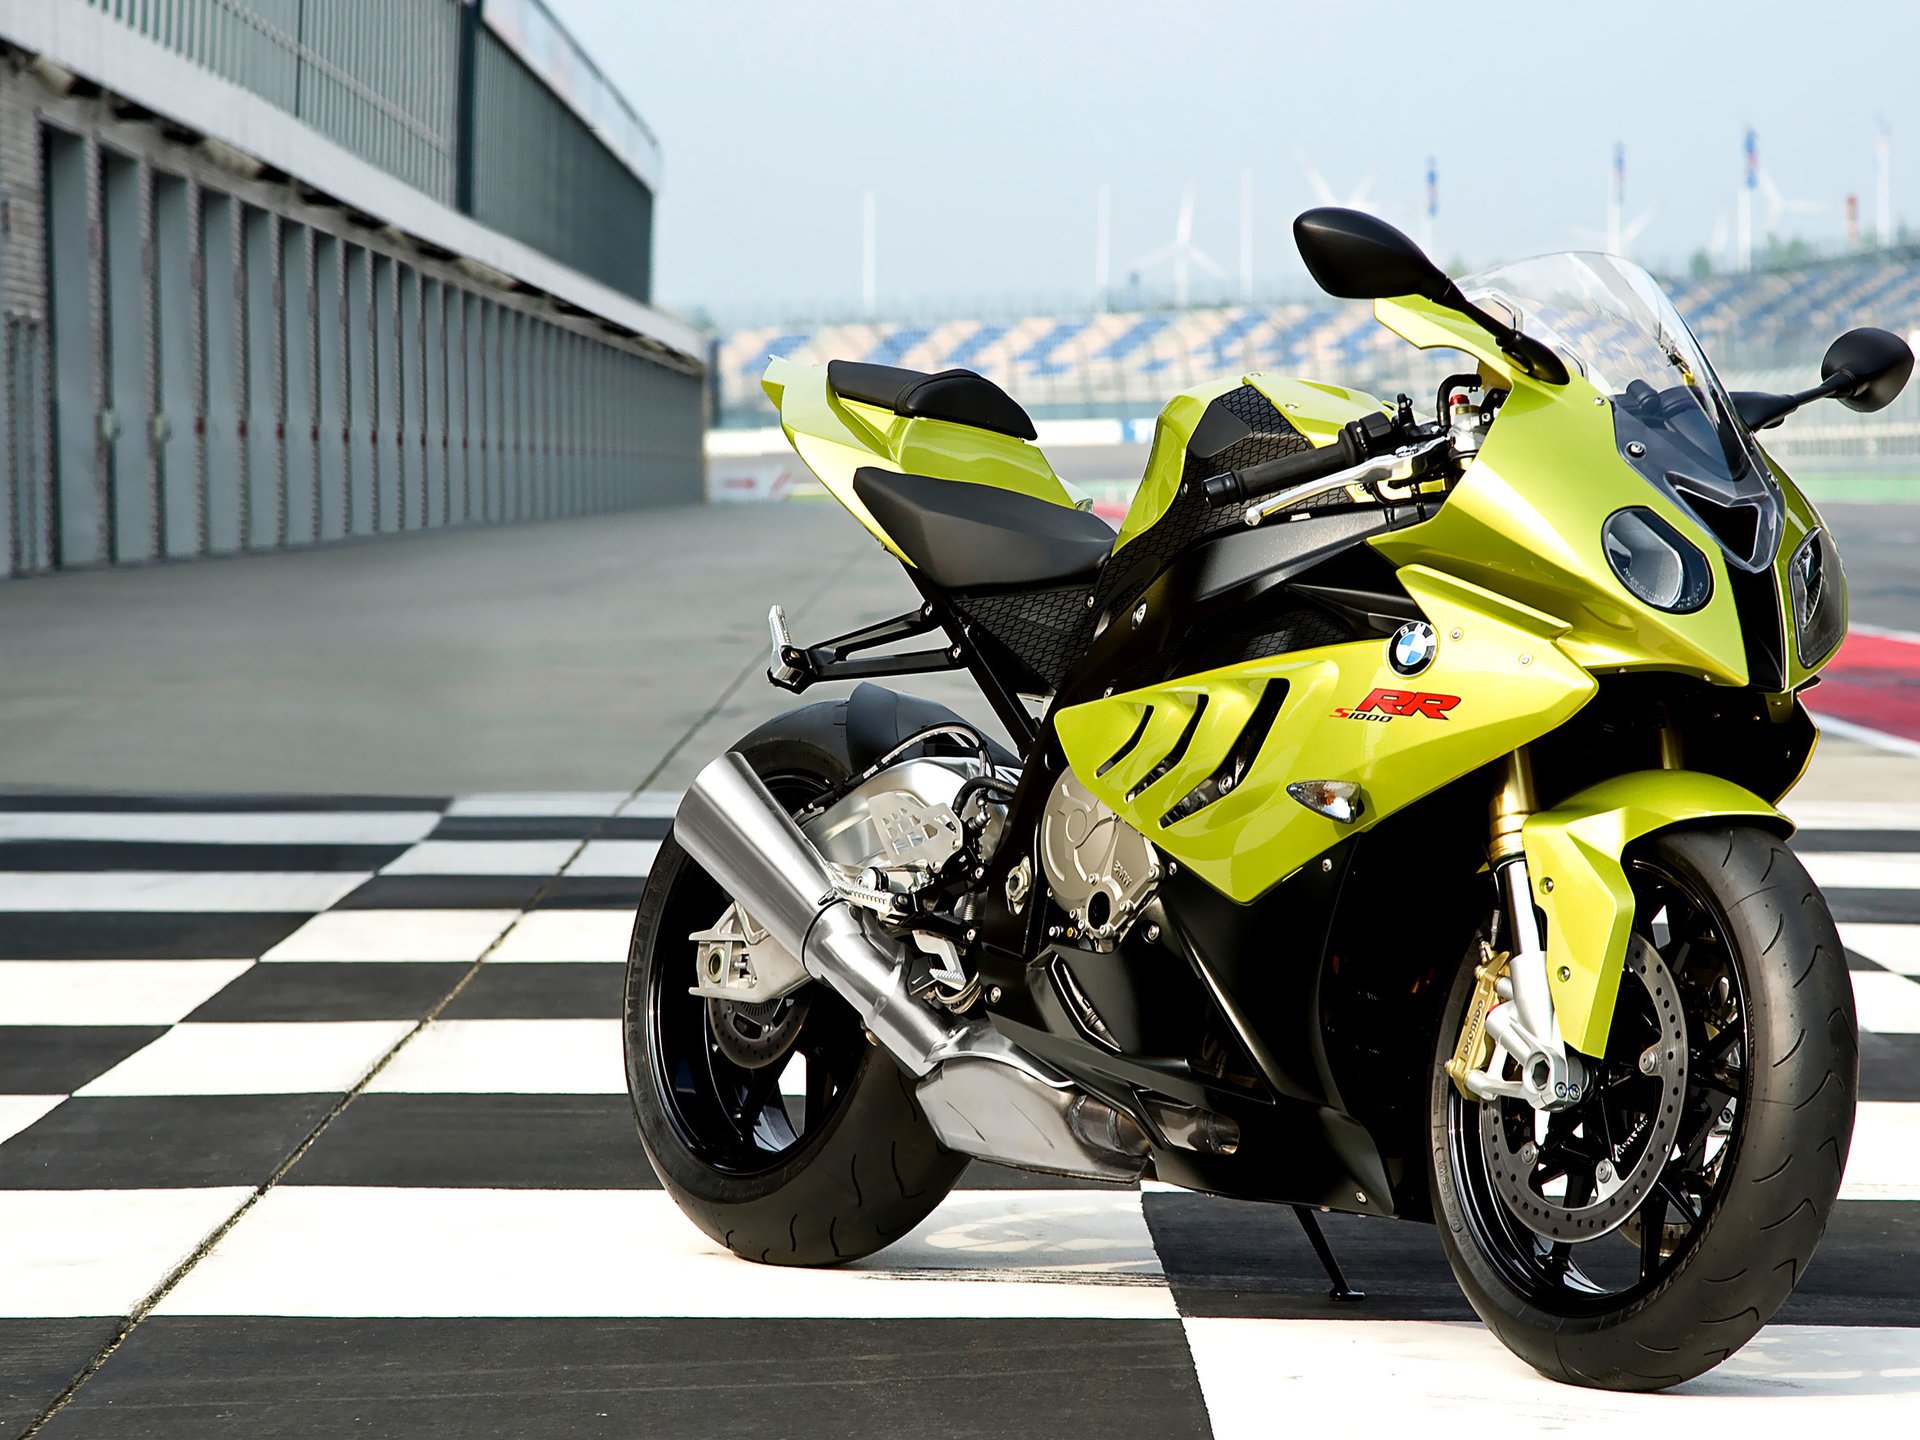 This yellow bike looks like an alien from the future of motorcycle racing - adrenaline in the blood